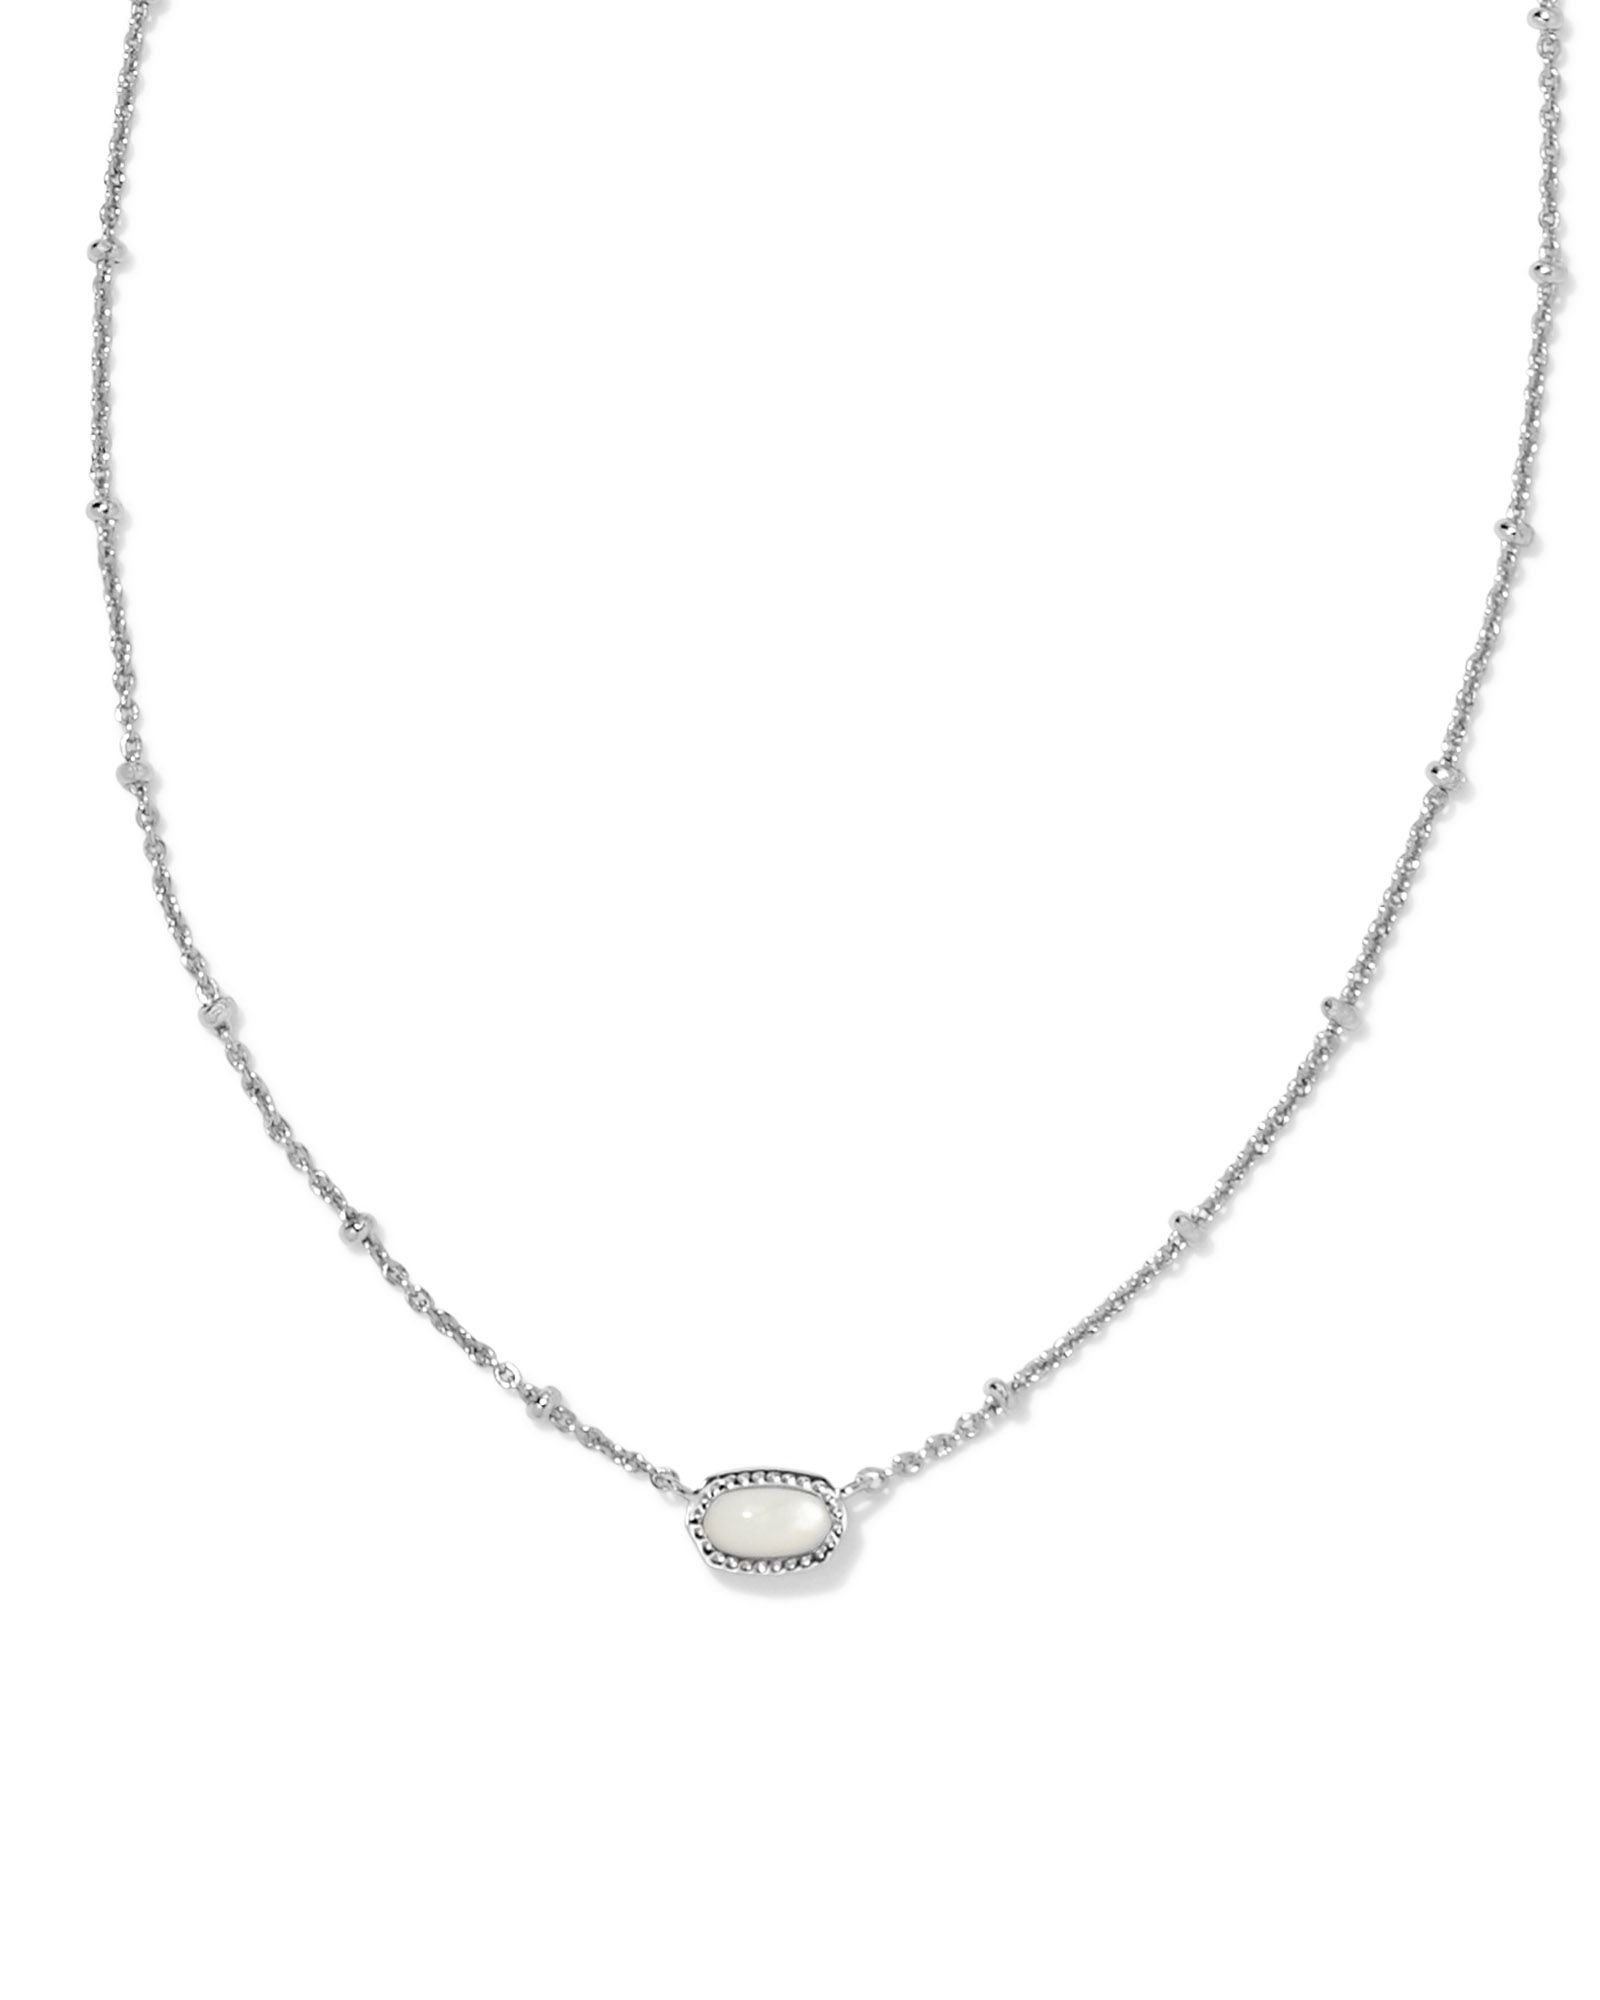 Mini Elisa Silver Satellite Short Pendant Necklace in Ivory Mother-of-Pearl | Kendra Scott